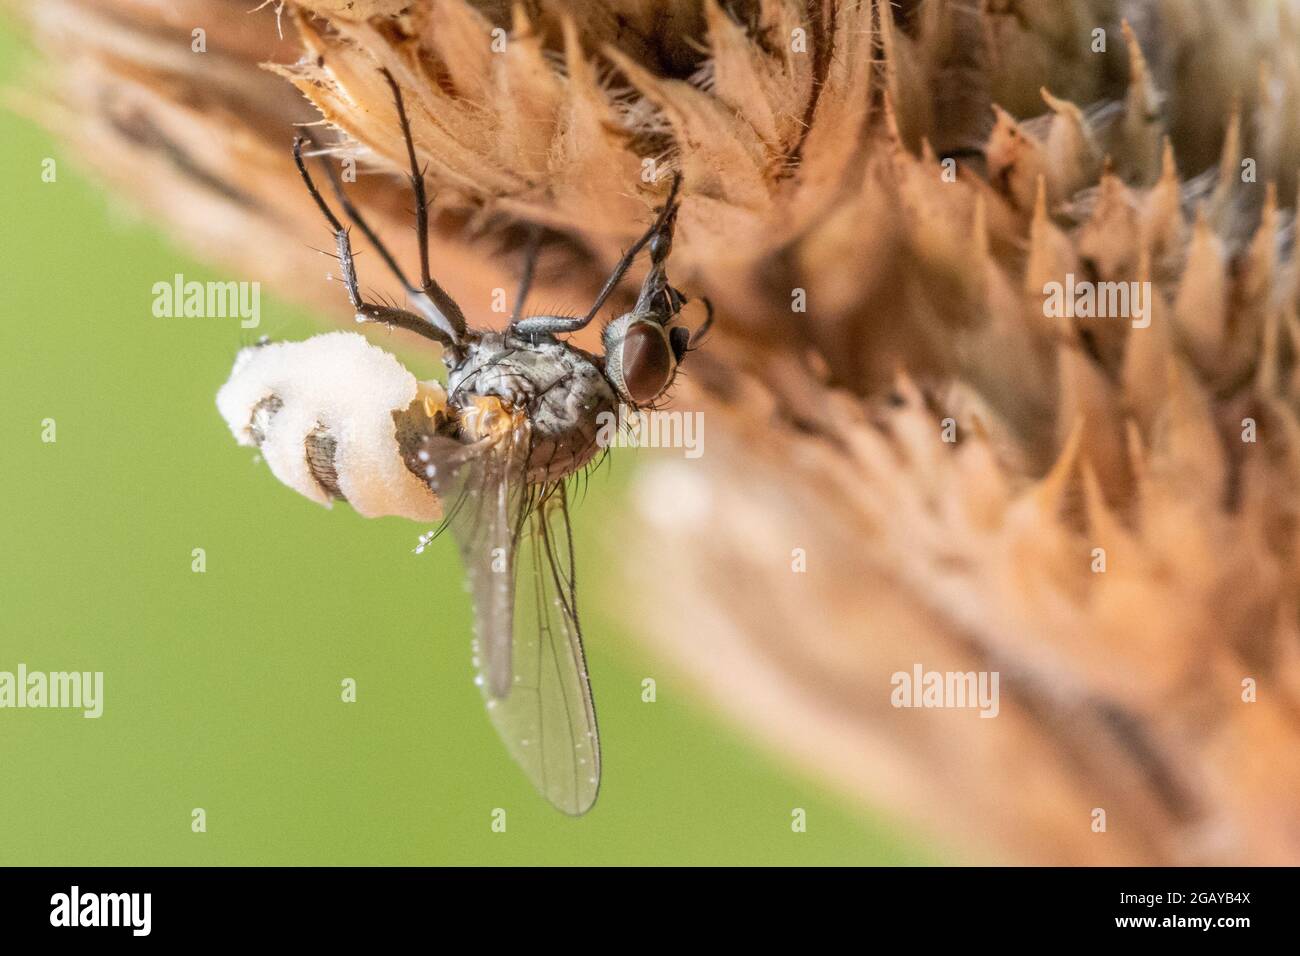 UK wildlife: Fly being attacked by the gruesome & parasitic Entomophthora fungus which has mummified it and now controls the fly's brain Stock Photo